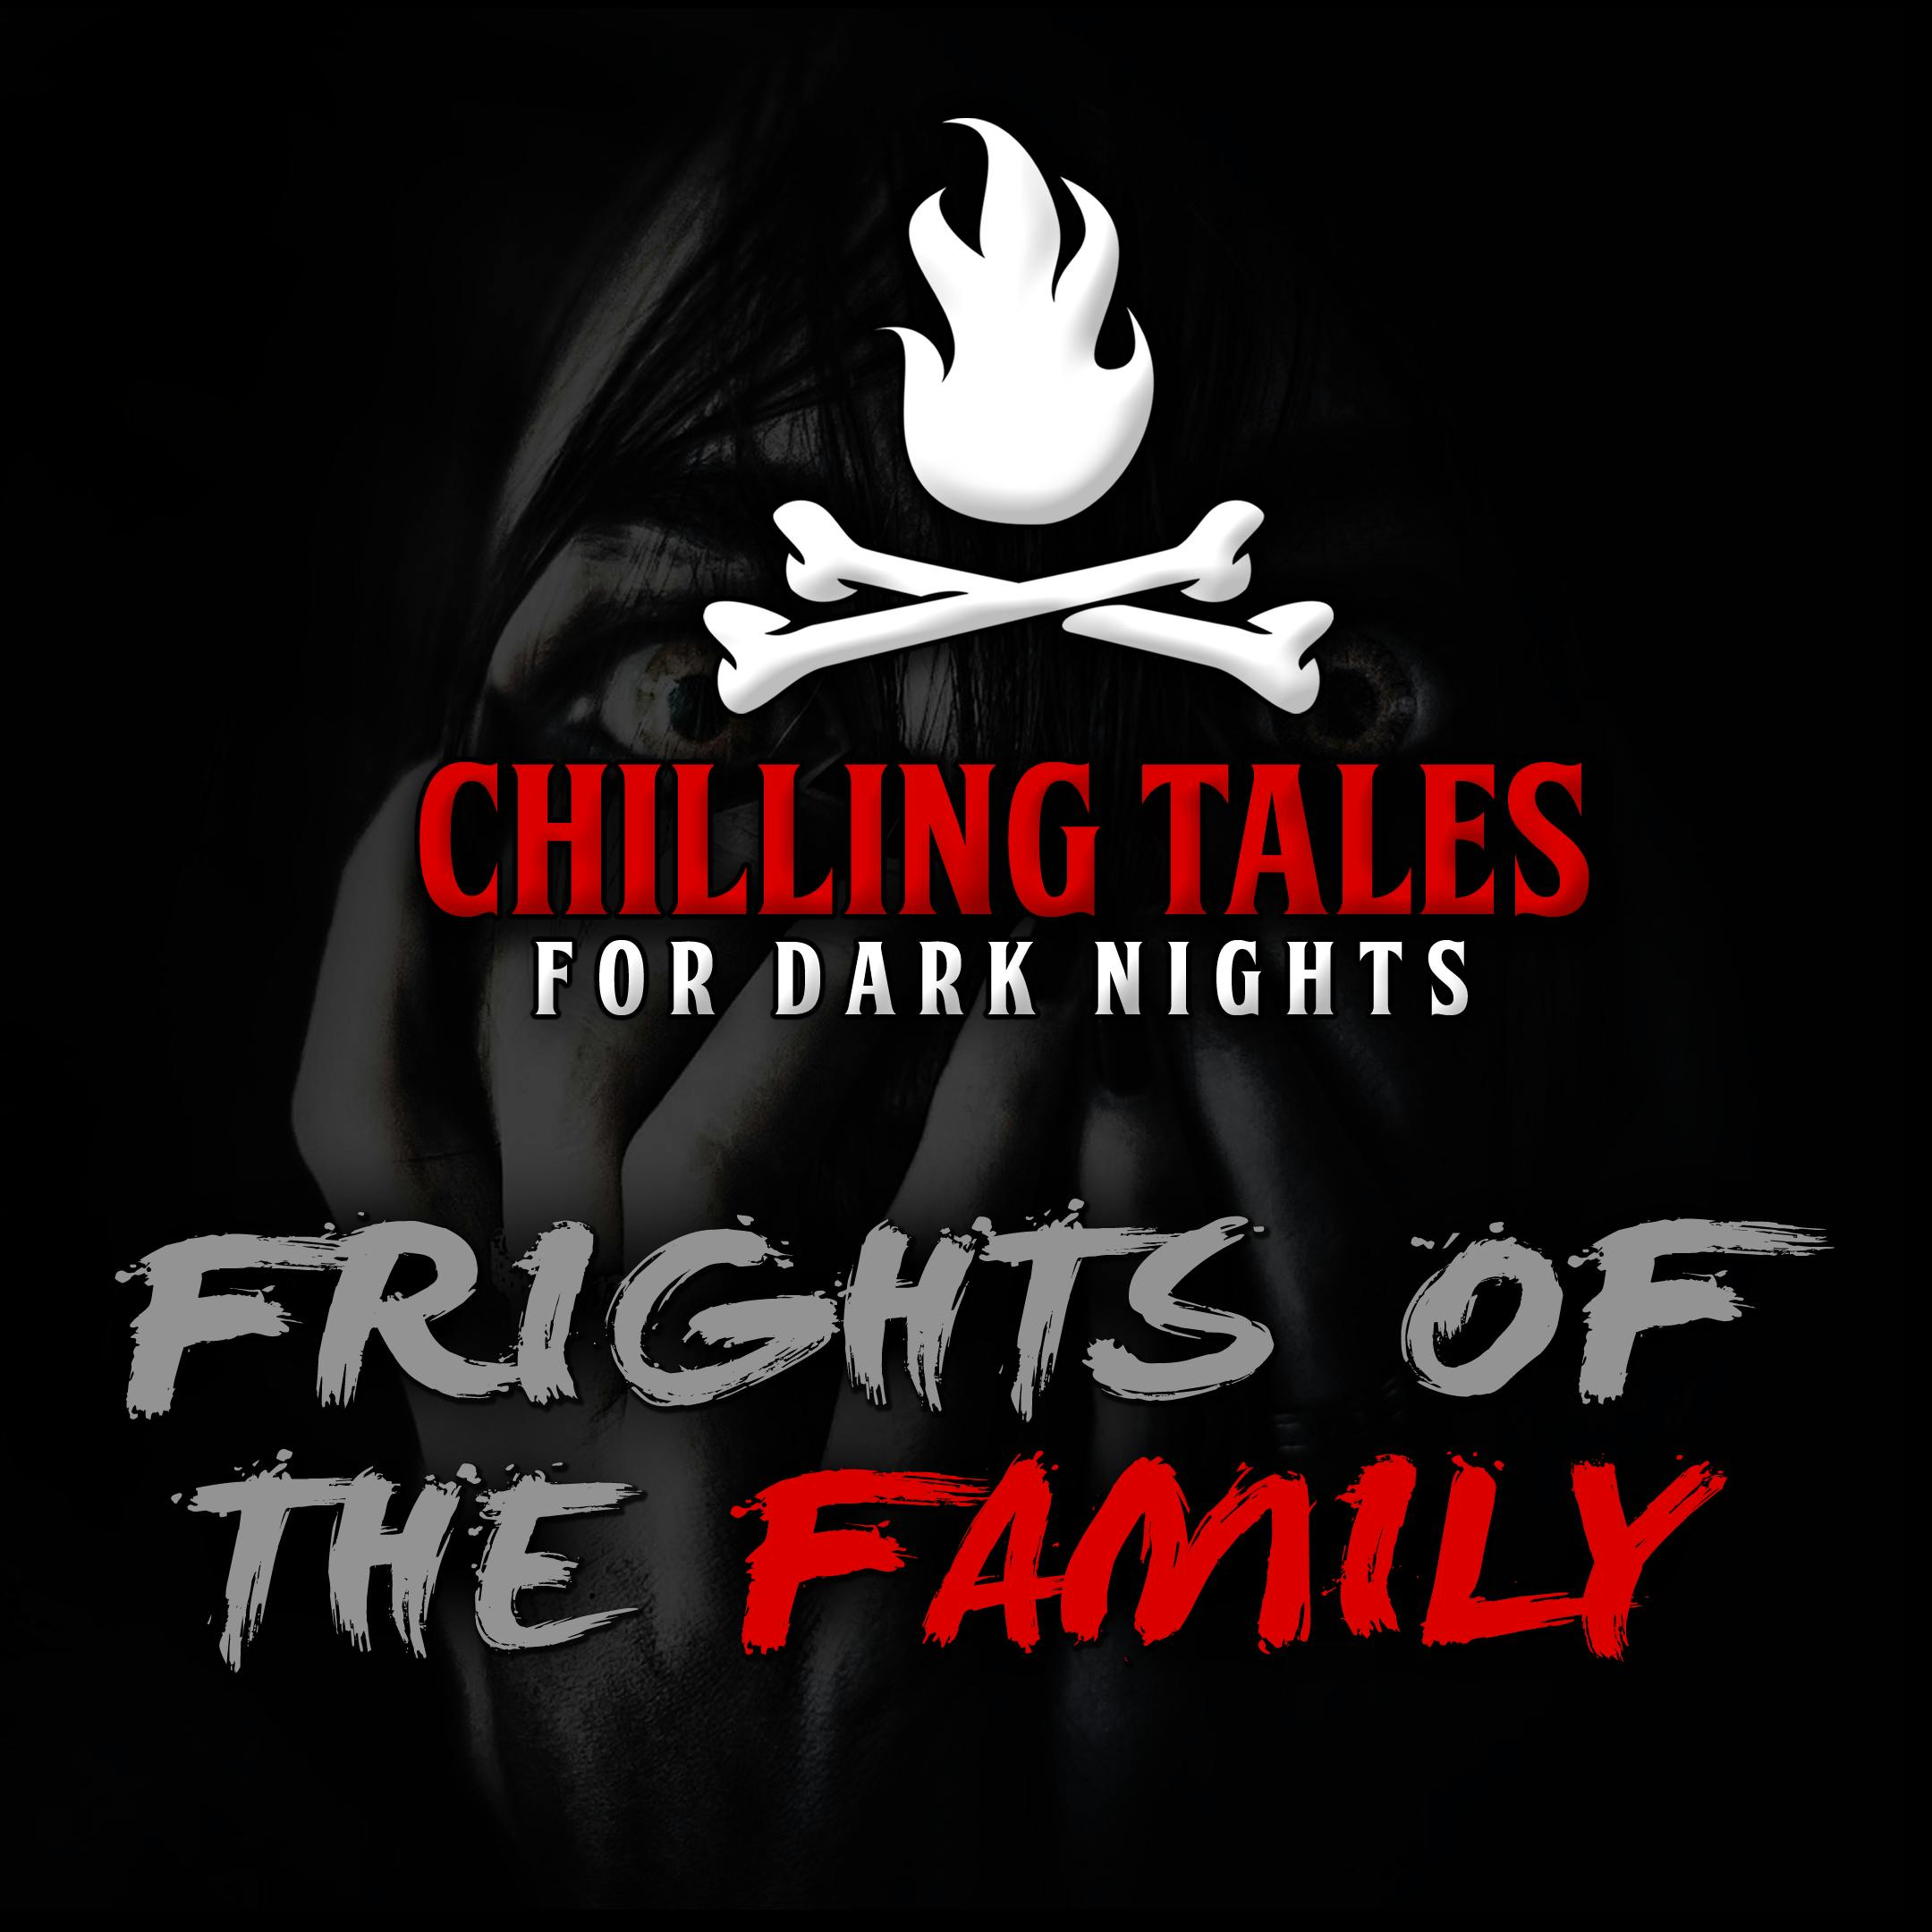 80: Frights of the Family – Chilling Tales for Dark Nights